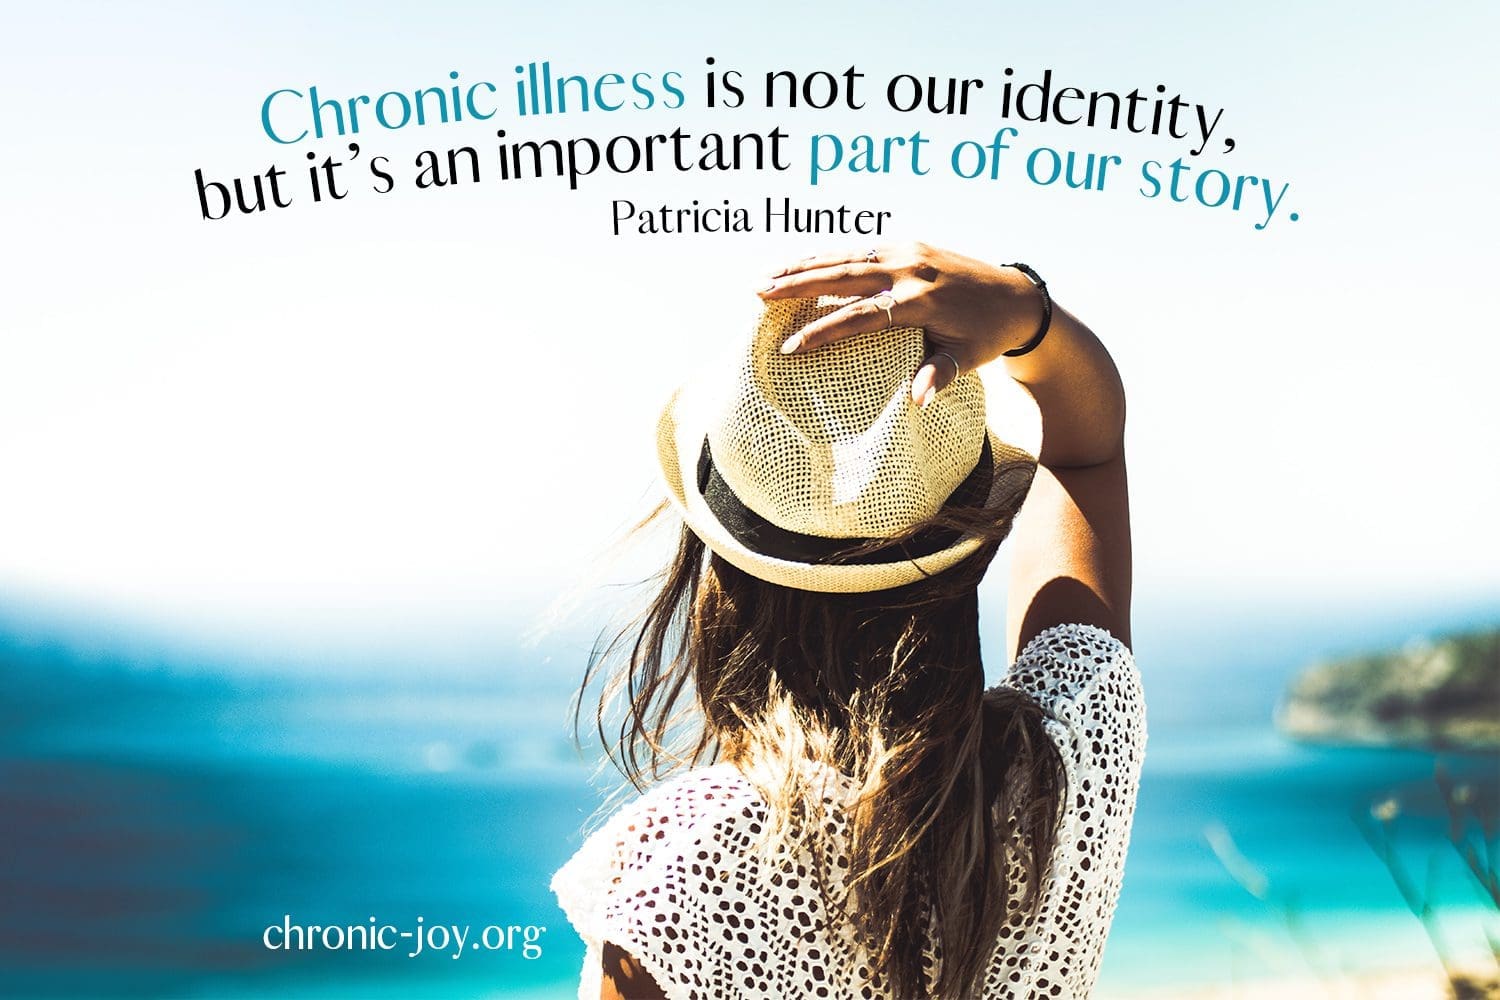 "Chronic illness is not our identity, but it’s an important part of our story." Patricia Hunter